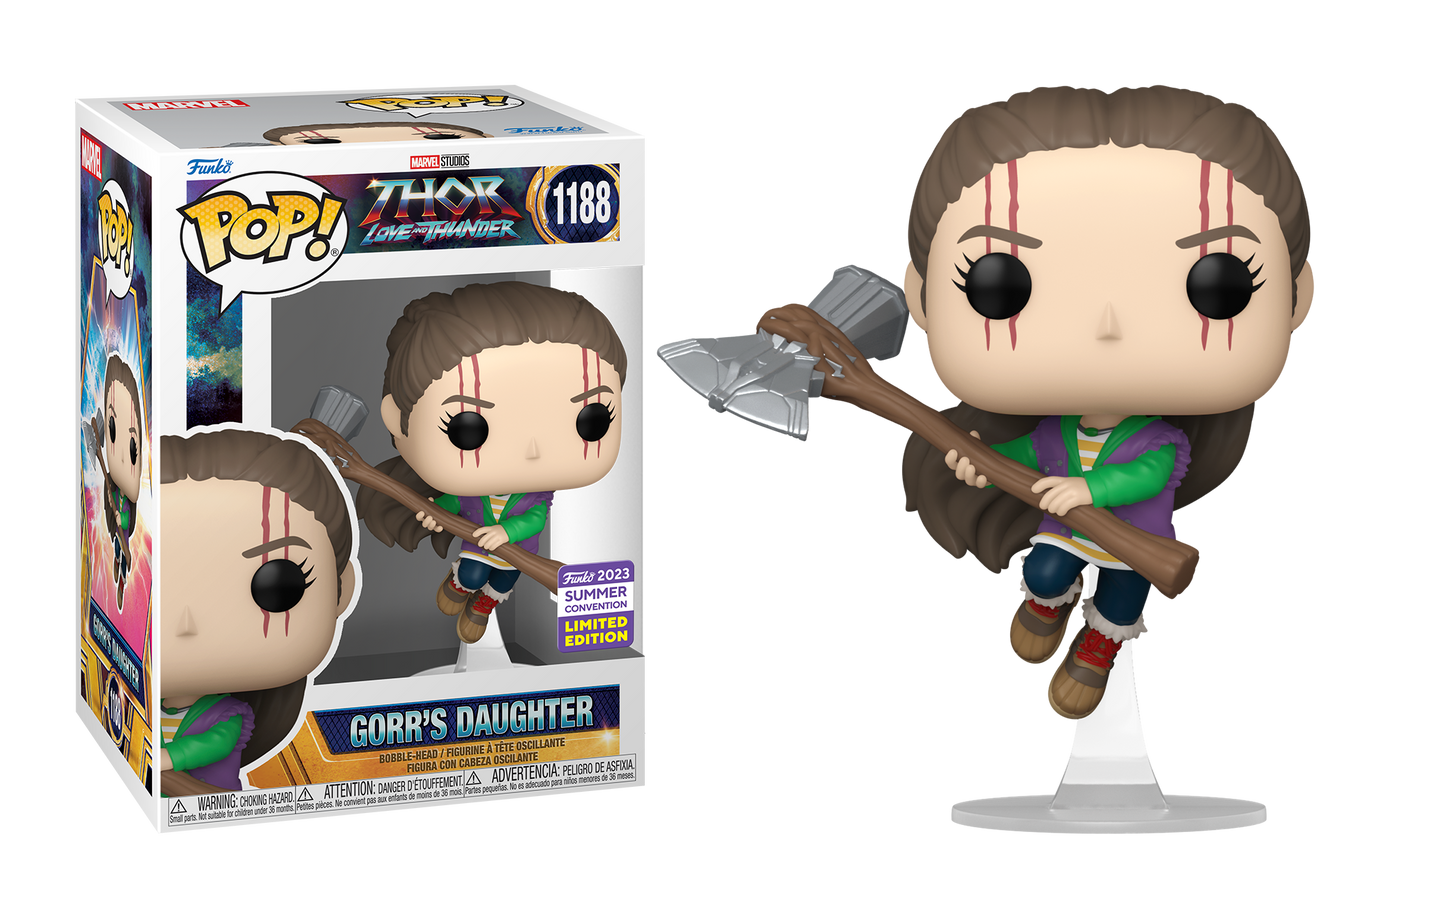 Thor: Love and Thunder - Gorr's Daughter SDCC 2023 Summer Convention Exclusive Pop! Vinyl